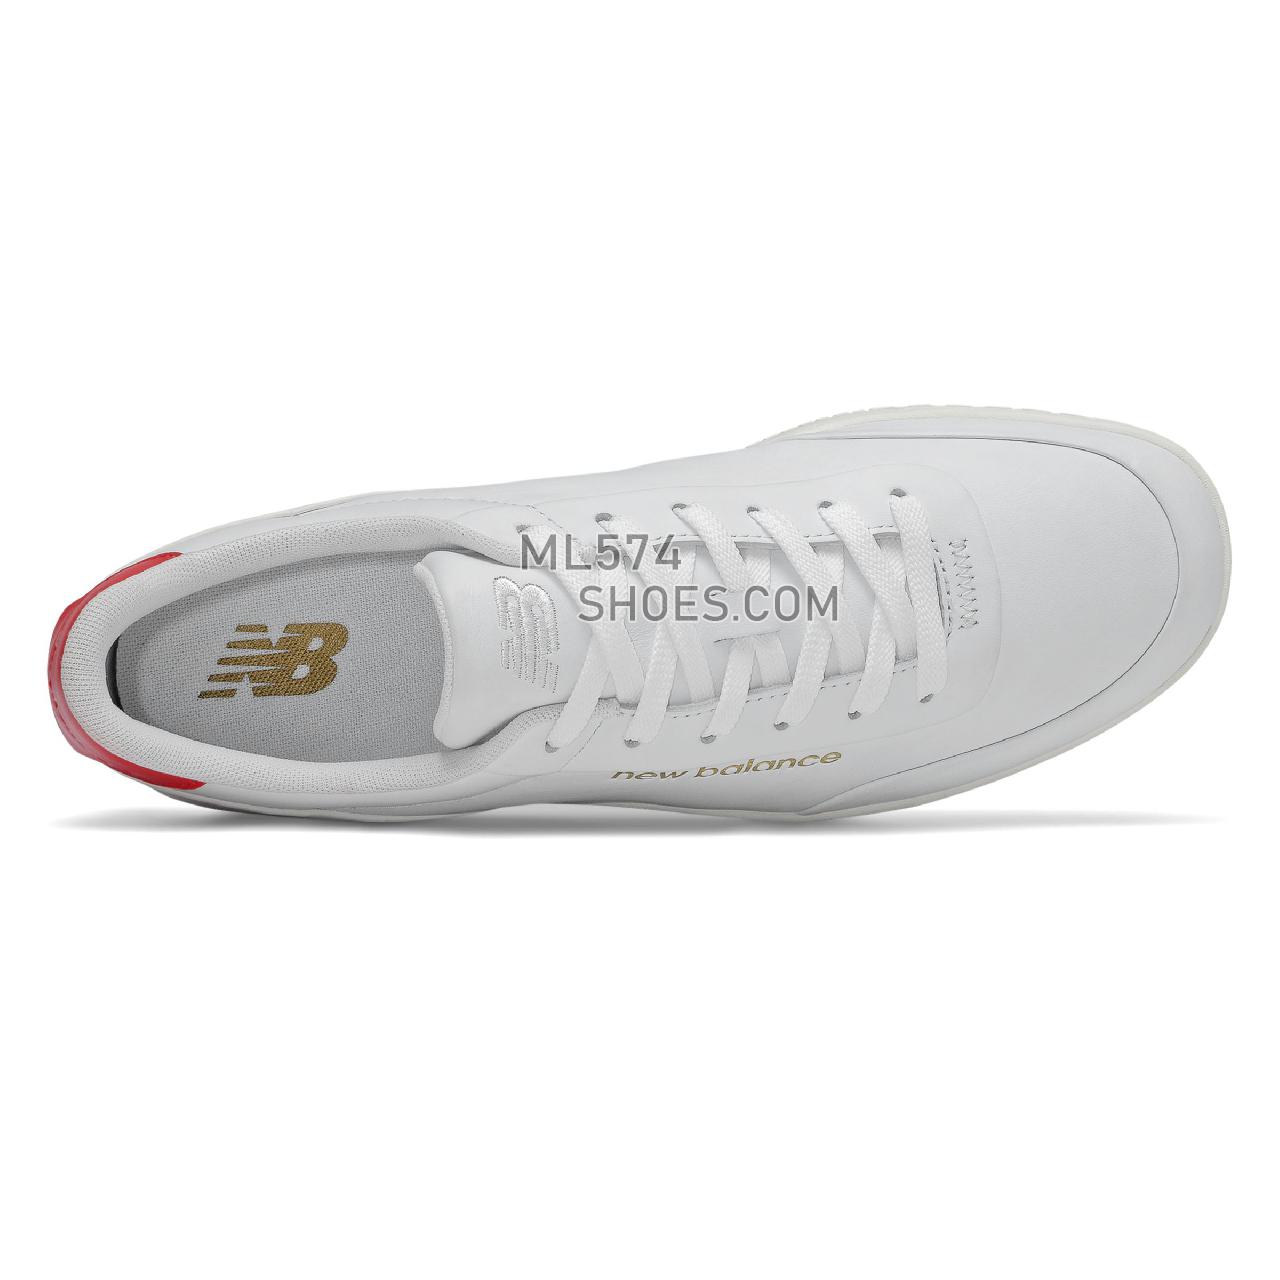 New Balance CT Alley - Men's CT Alley Classic - White with Red - CTALYMSK